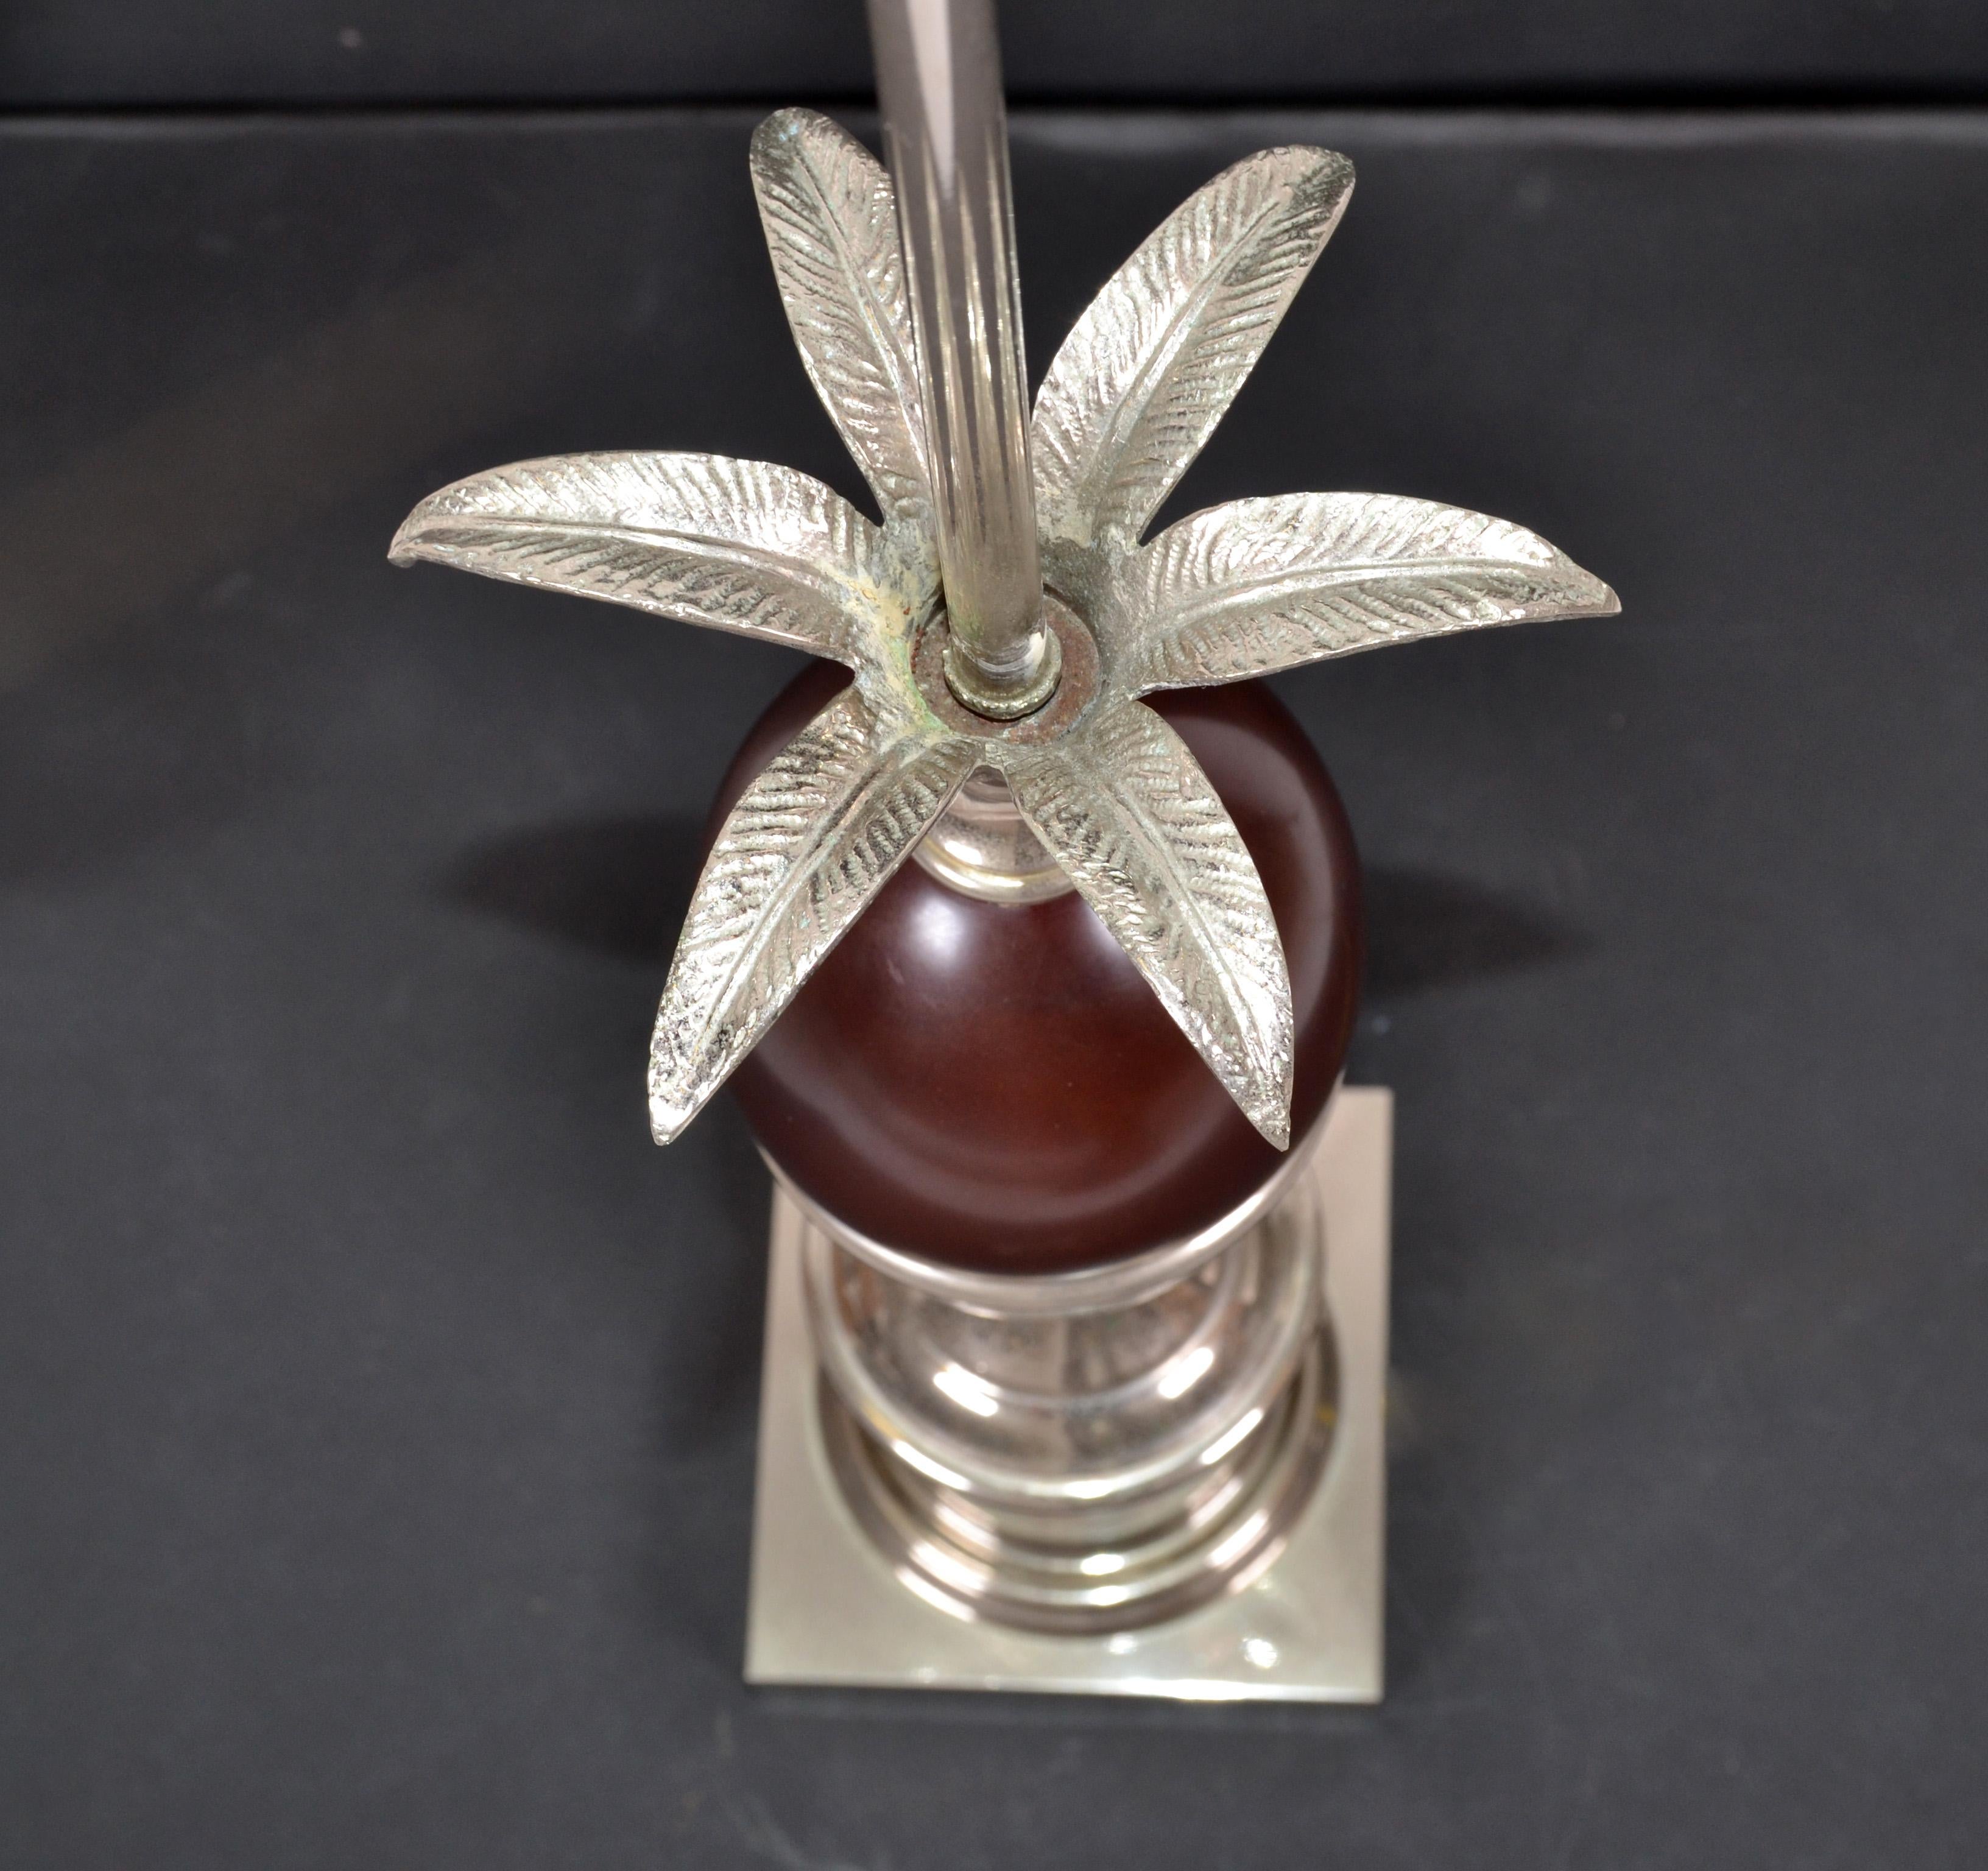 Resin Maison Charles French Art Deco Red Acorn Nickel-Plated Table Lamp & Shade, 1950s For Sale